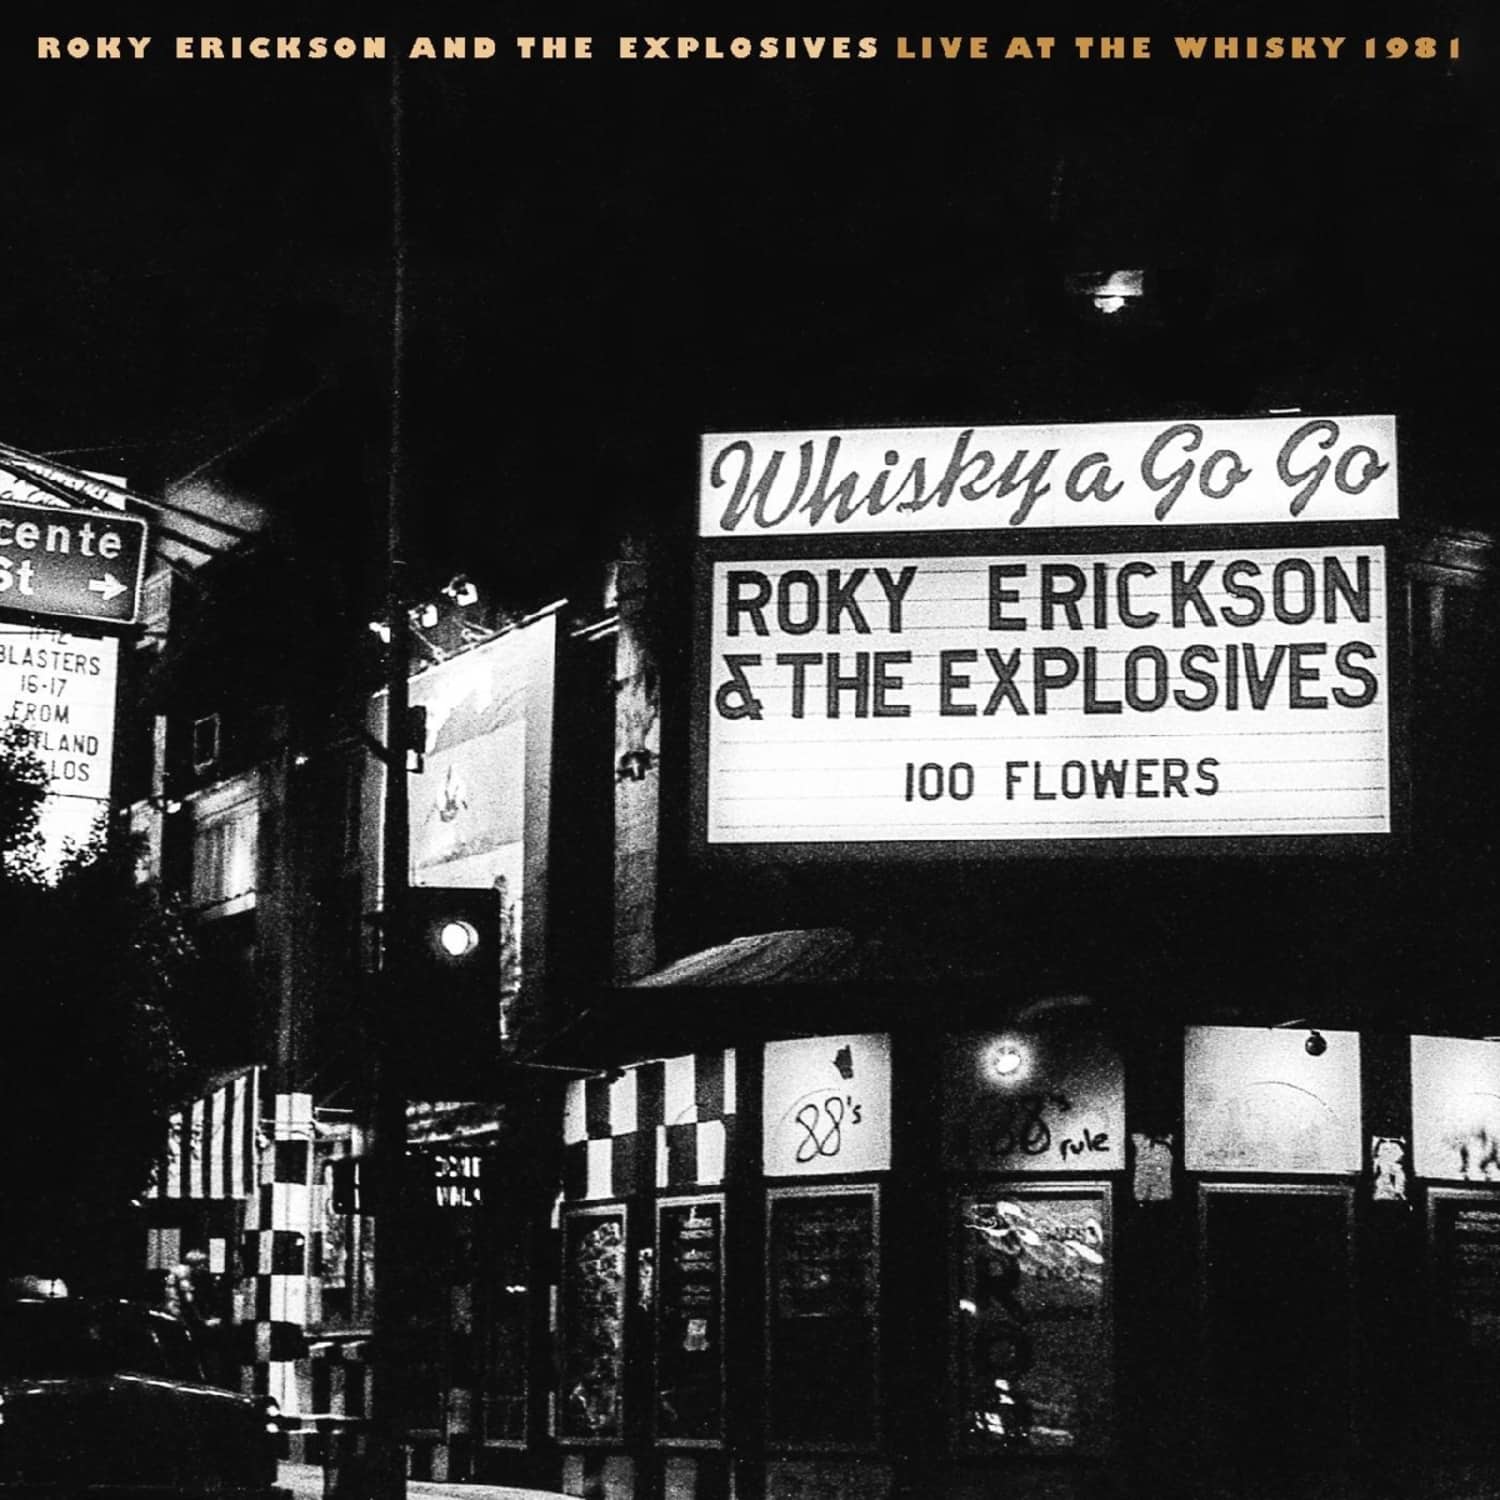  Roky Erickson & Explosives - LIVE AT THE WHISKY 1981 